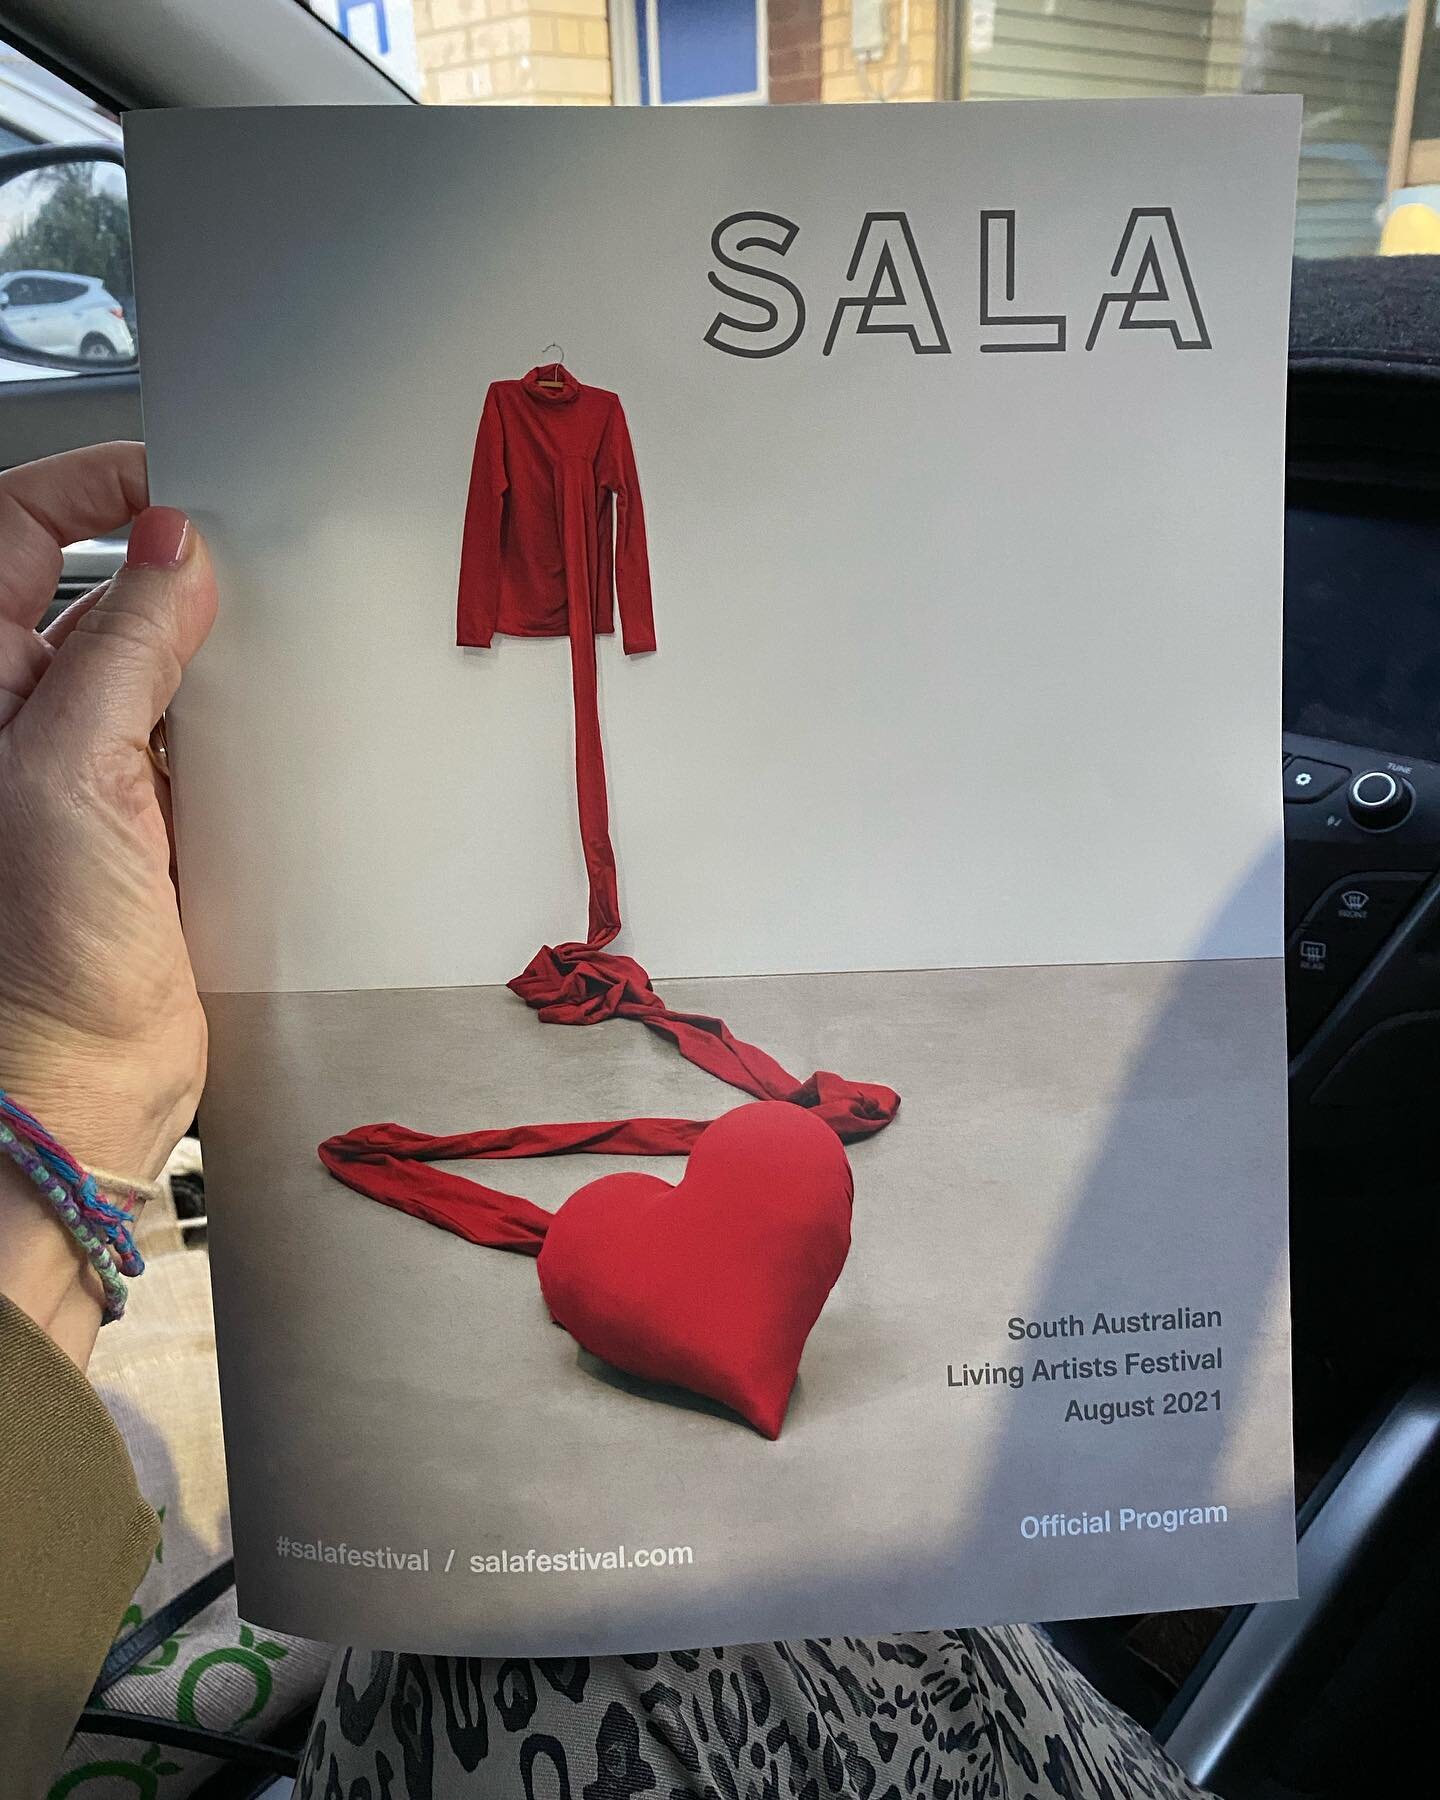 Have you got your copy? SALA Festival program available today from all Foodland Stores. We&rsquo;re on page 19, right where the sun is shining 😍 

Also, SALA 2021 Snapshot is available in today&rsquo;s Advertiser.

@salafestival 
#HereComesTheSun 
@